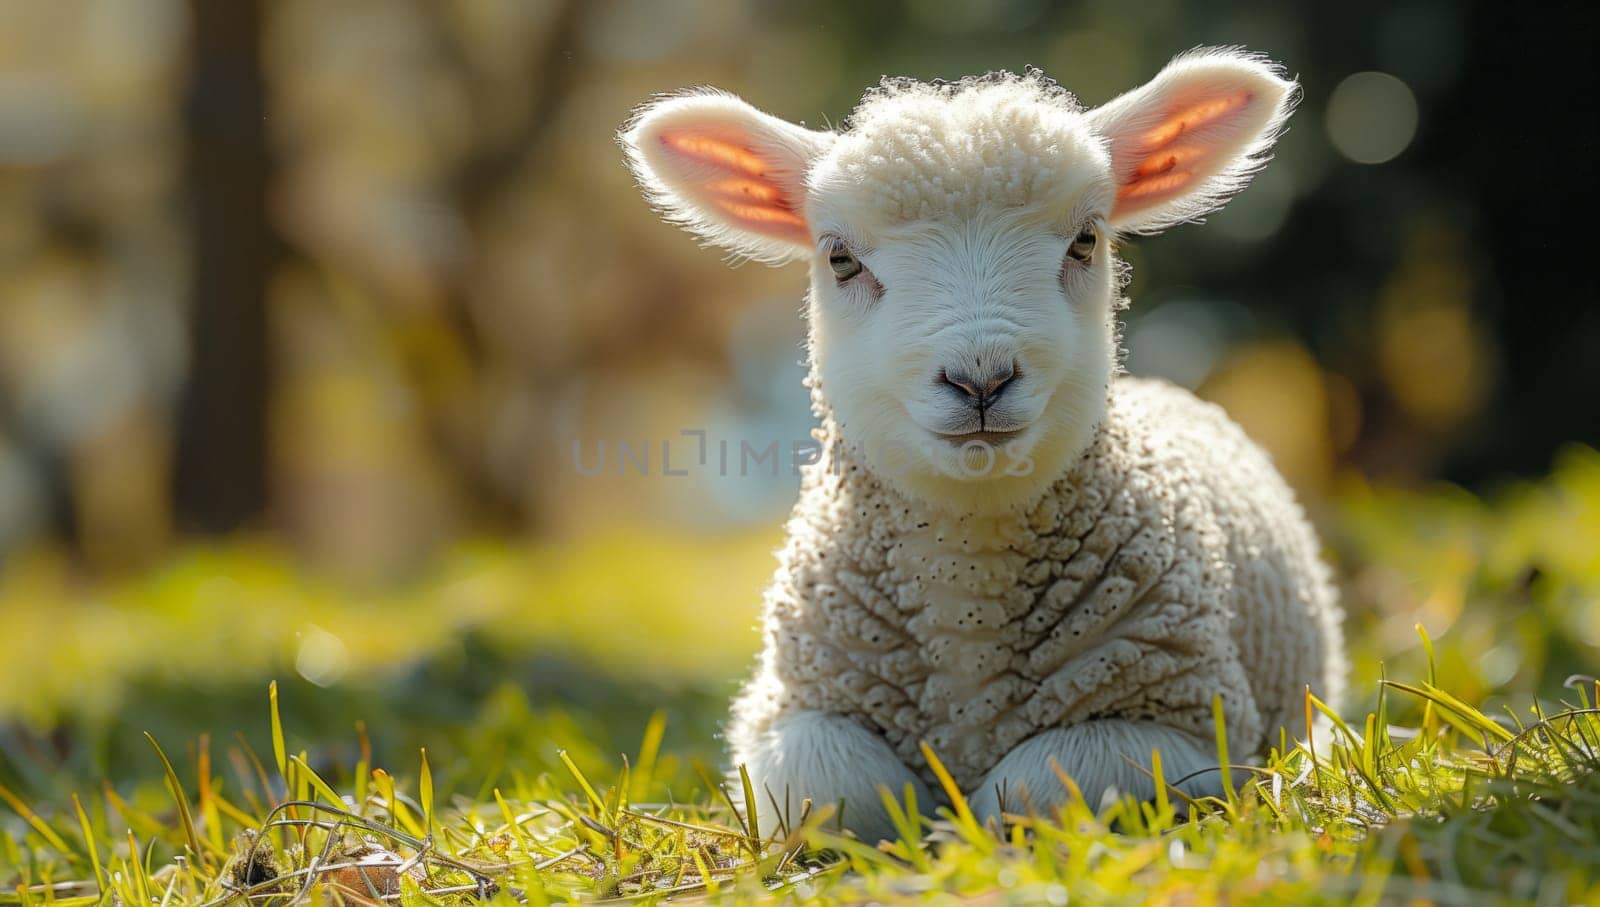 A young sheep is resting on the grass, its eyes fixed on the camera. This terrestrial animal blends in with the green meadow, showcasing its snout and fluffy coat